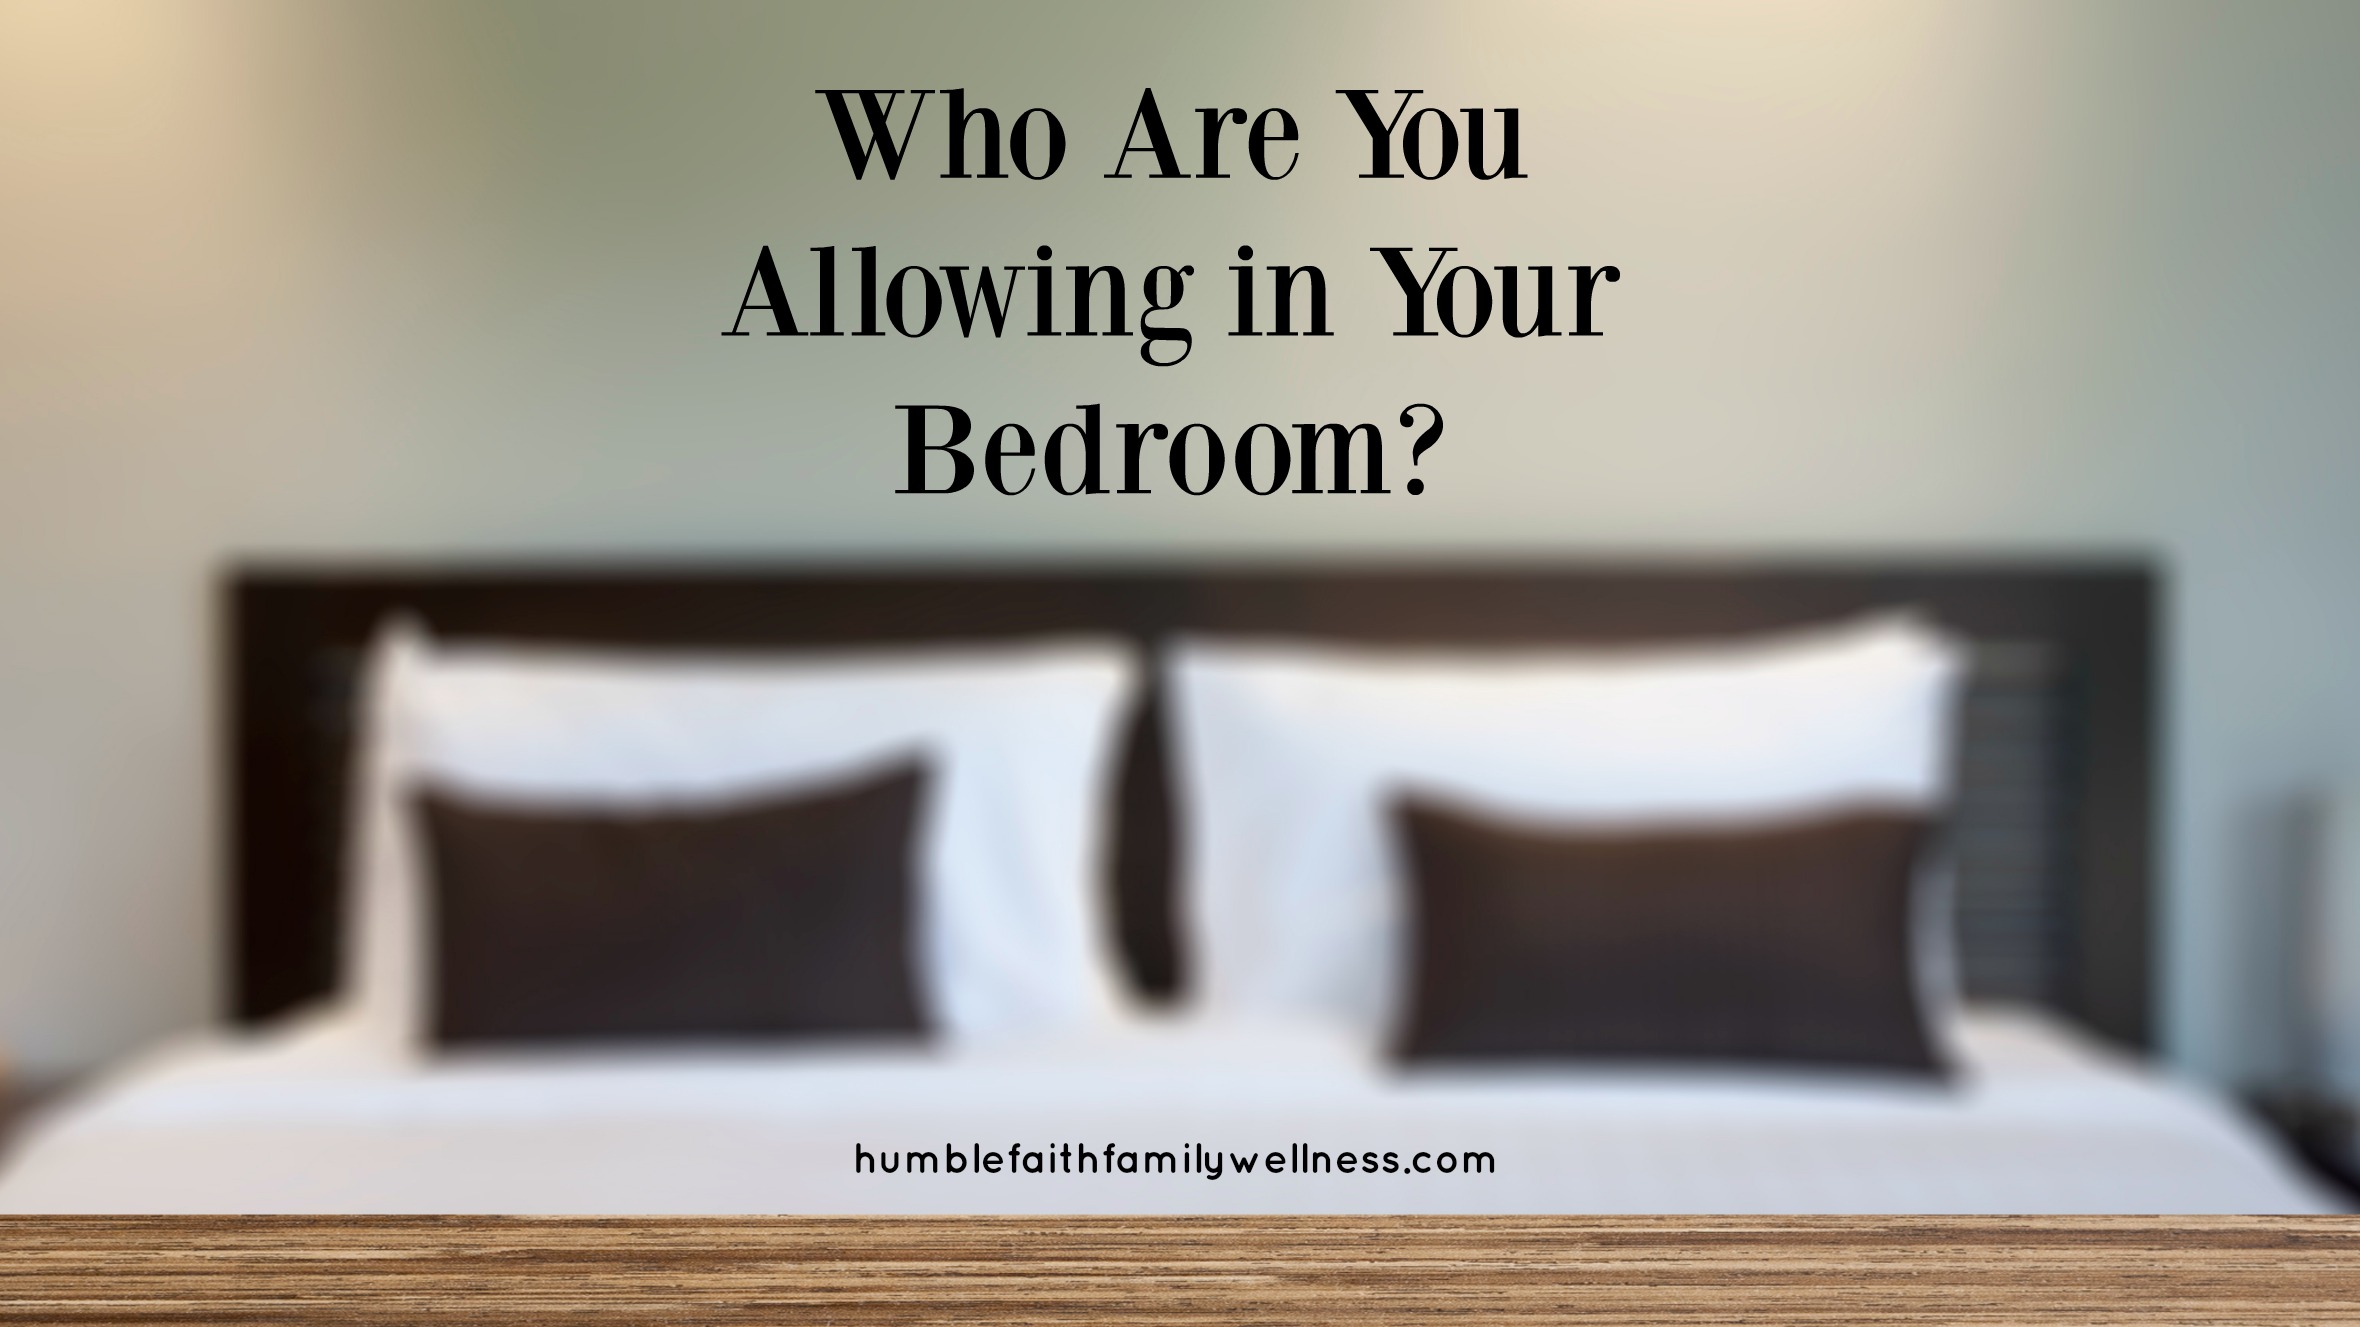 Who are you allowing in your bedroom? #ChristianMarriage